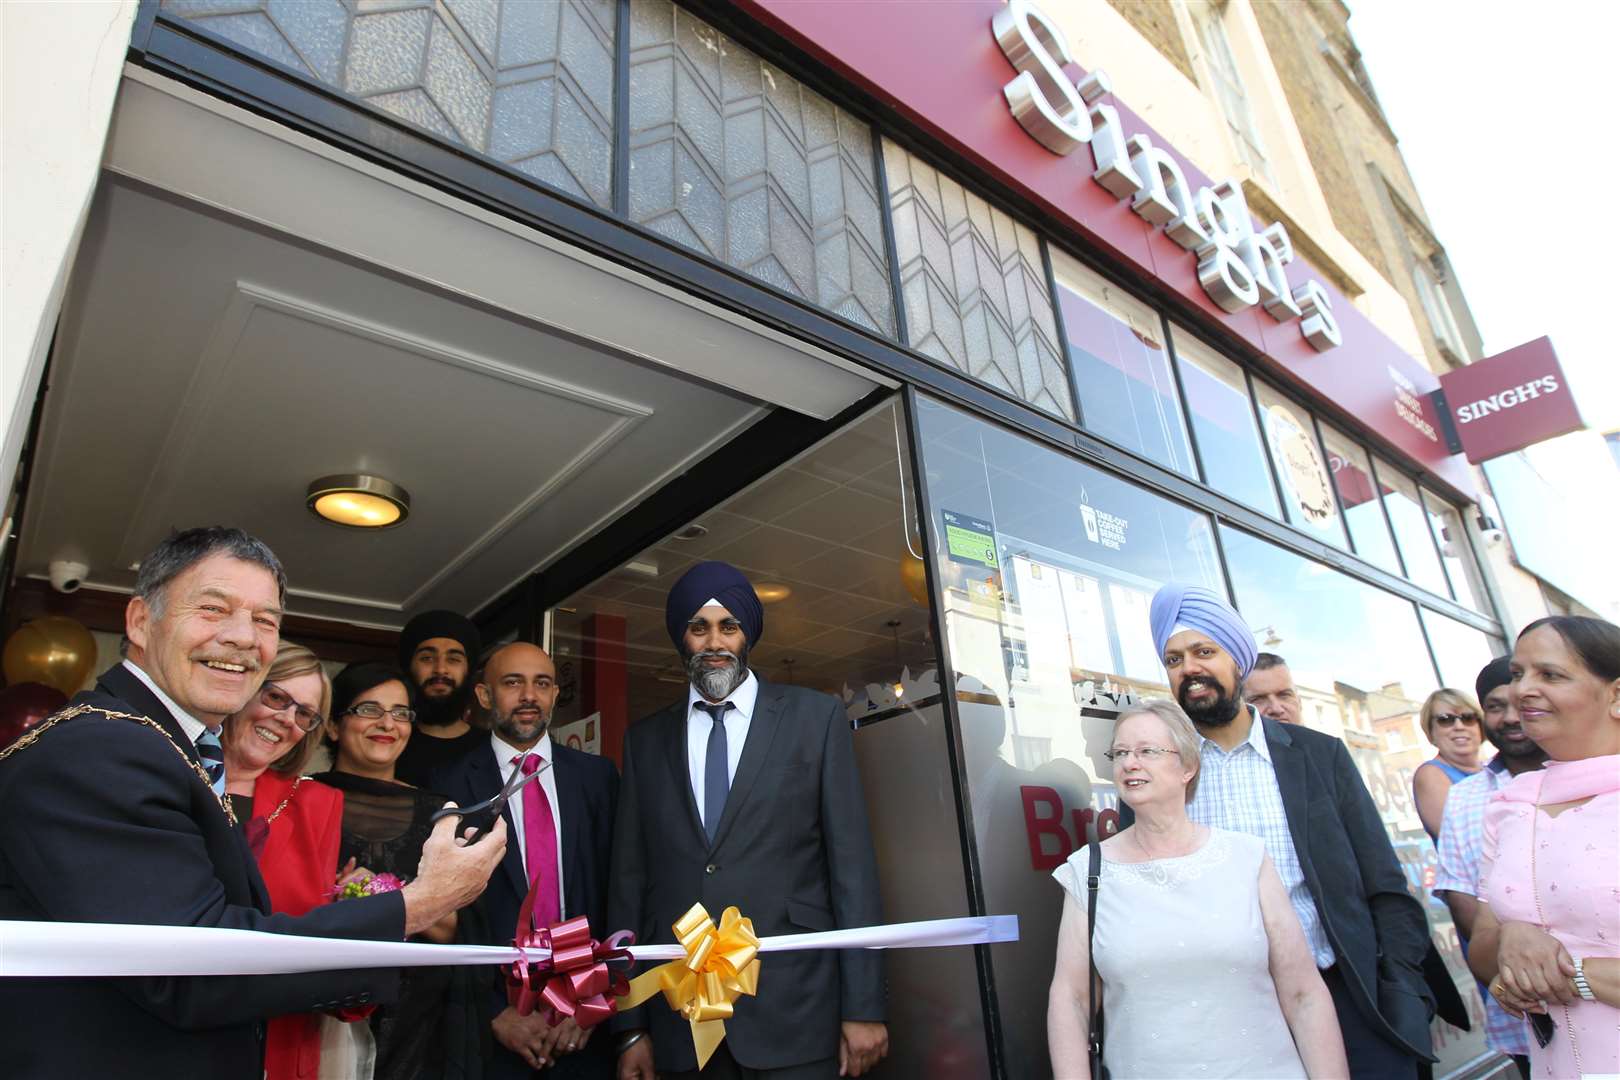 From left, the Mayor of Gravesham Cllr Mick Wenban and Mayoress Fiona Strike JP, co-owner Jaspreet Lalli, Harsimran Singh Lalli, Natwest relationship manager Rav Sall and co-owner Parvinder Singh Lalli MBE at the official opening of Singh's Vegetarian Restaurant in Gravesend